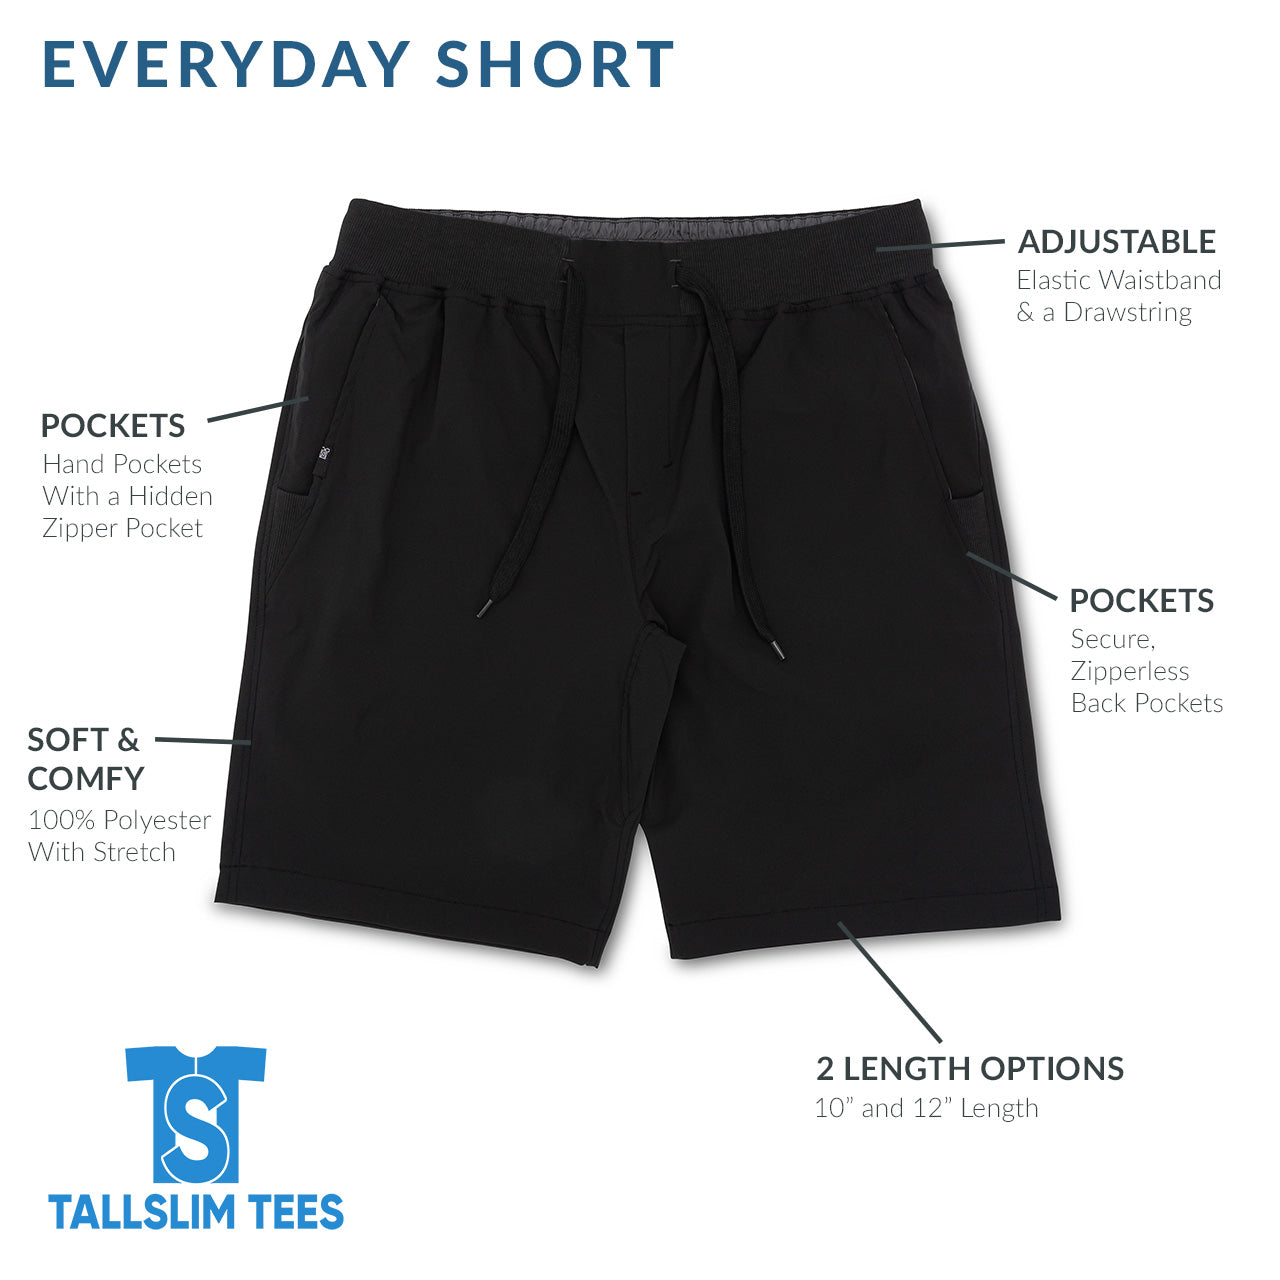 Everyday Shorts for Tall Slim Men Infographic